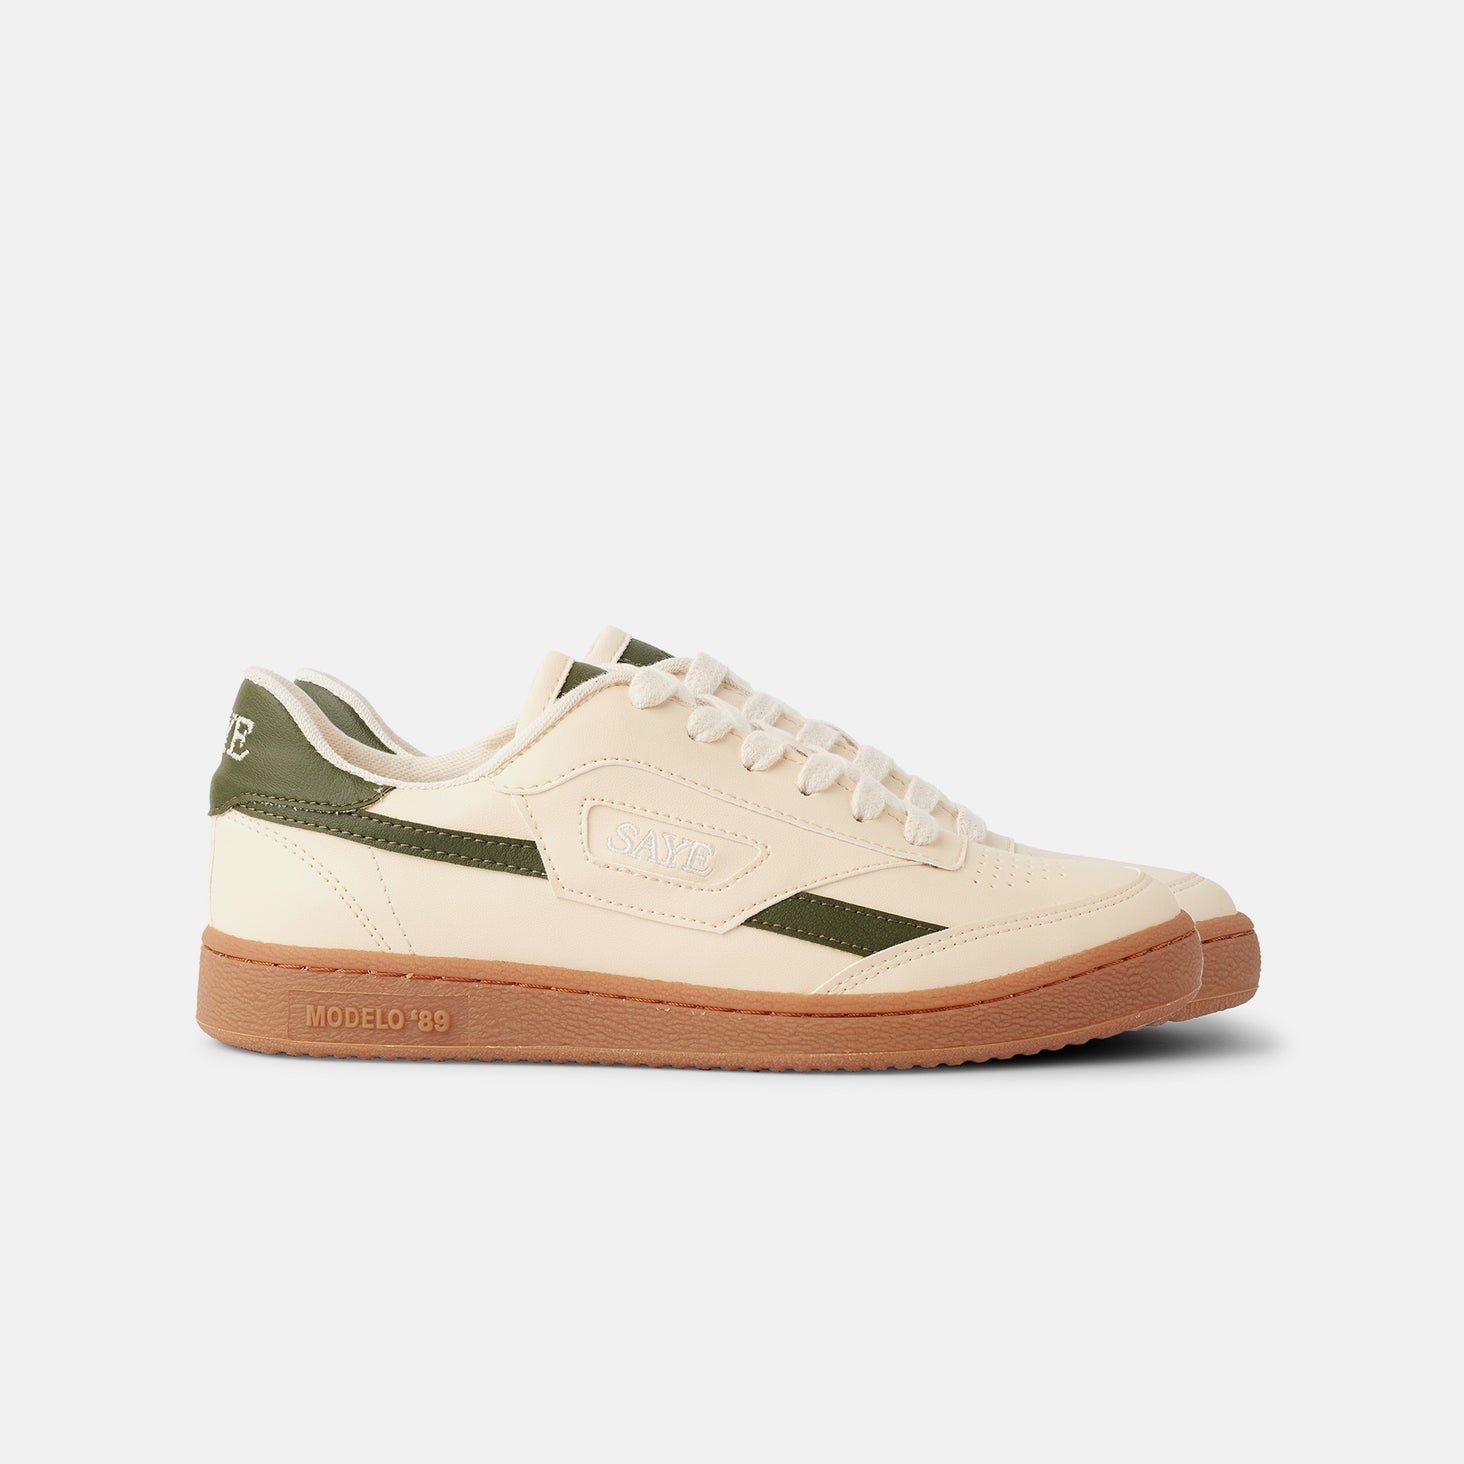 A white and green Modelo '89 Sneaker from the SAYE Greens Capsule collection on a white background.